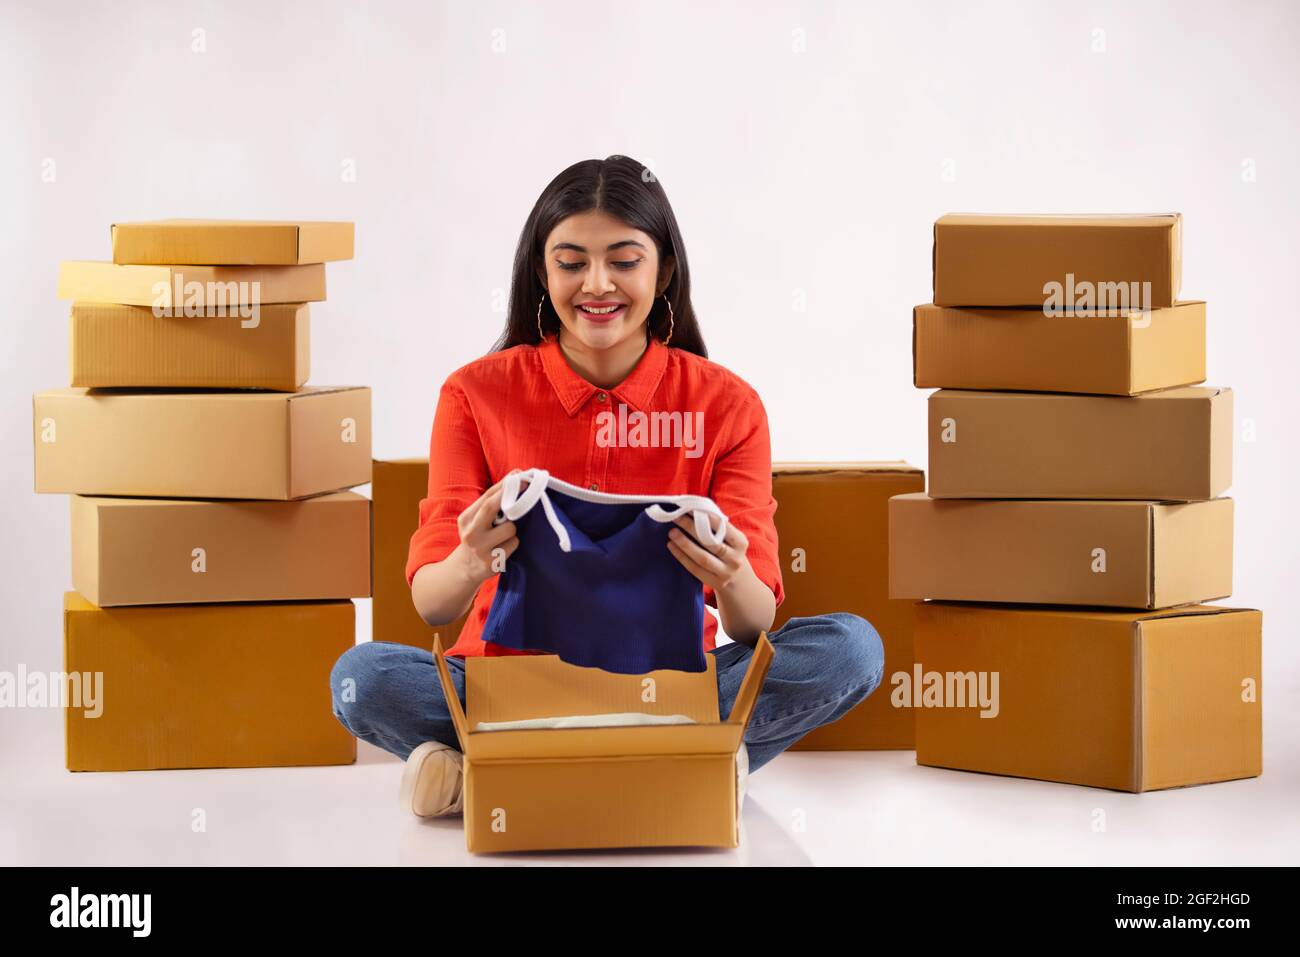 A young woman unpacking new dress sitting amidst cardboard boxes. Stock Photo